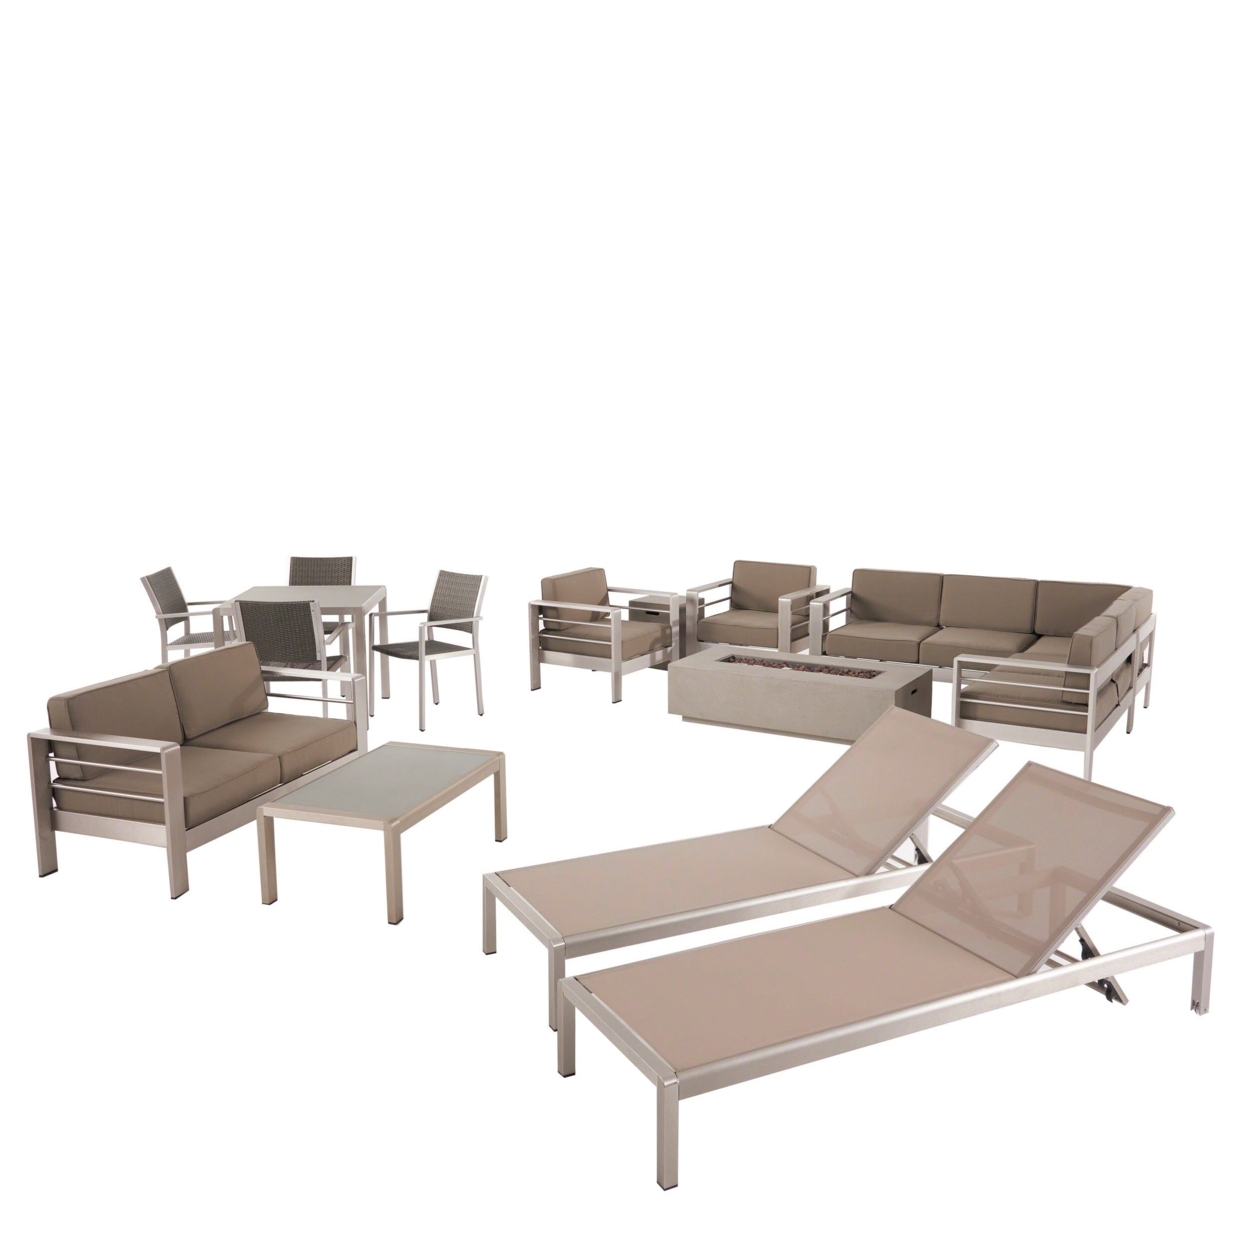 Cherie Outdoor Estate Collection With Fire Pit And Tempered Glass Top Dining Table - Light Gray